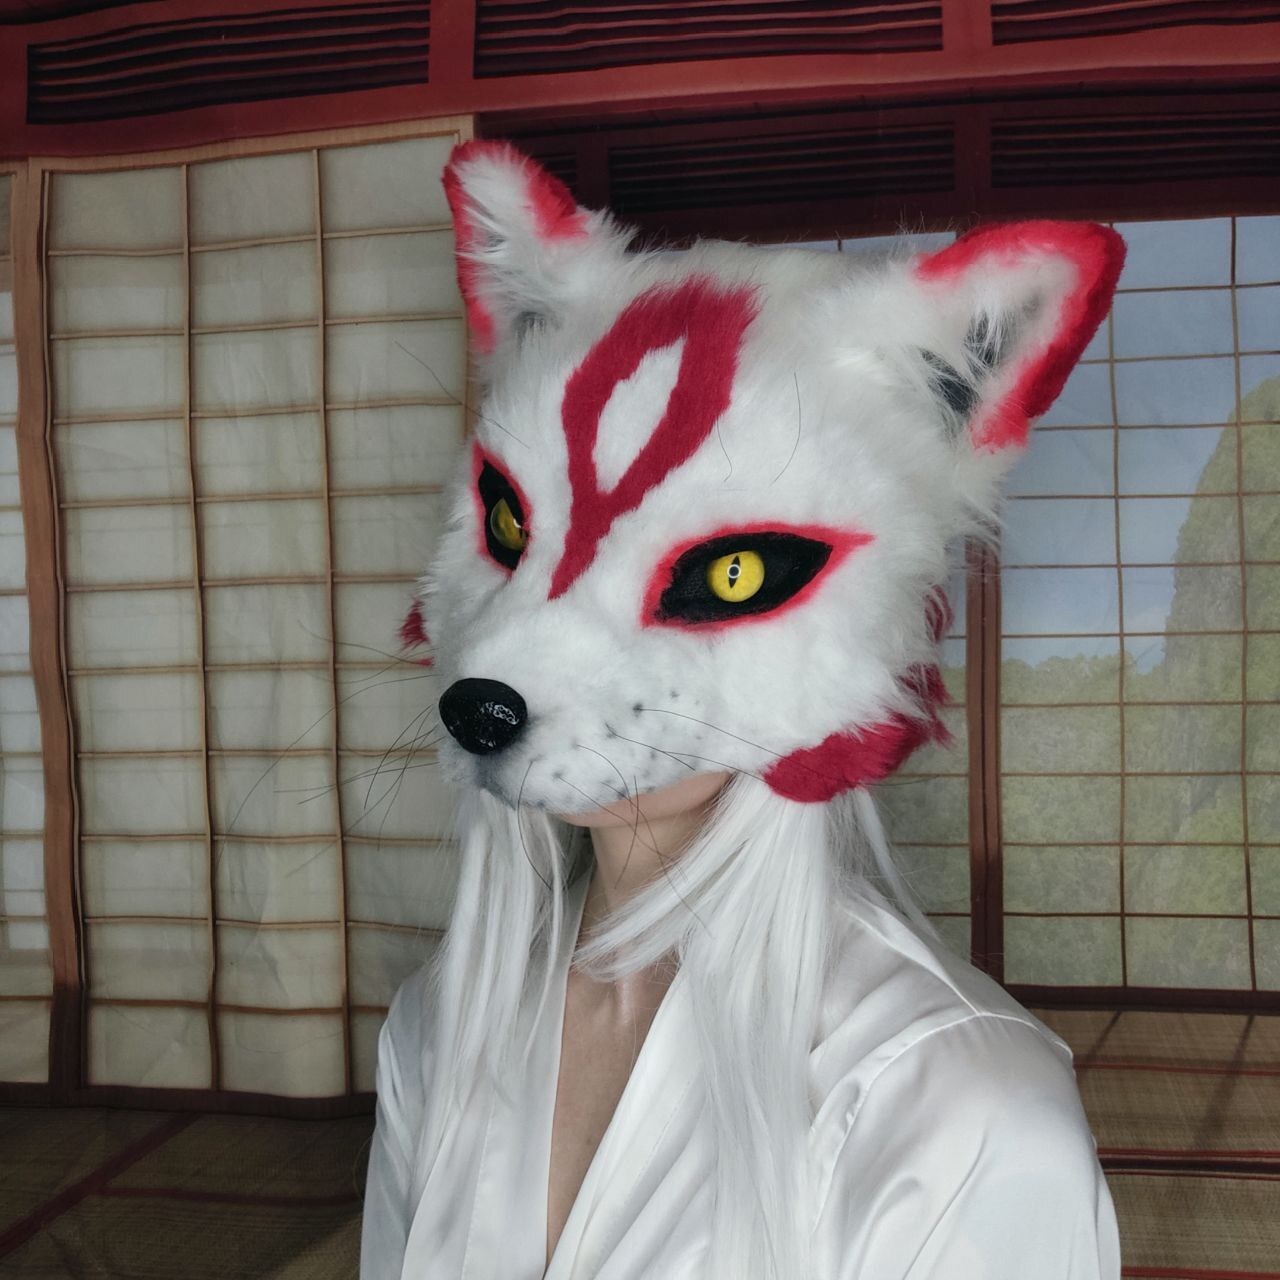 Half mask Kitsune - My, Accessories, Sewing, Decoration, With your own hands, Mask, Kitsune, Fox, Friday tag is mine, Cosplay, Cosplayers, Polymer clay, Fur, Fur products, Masquerade, Shamans, Mythology, Japanese mythology, Longpost